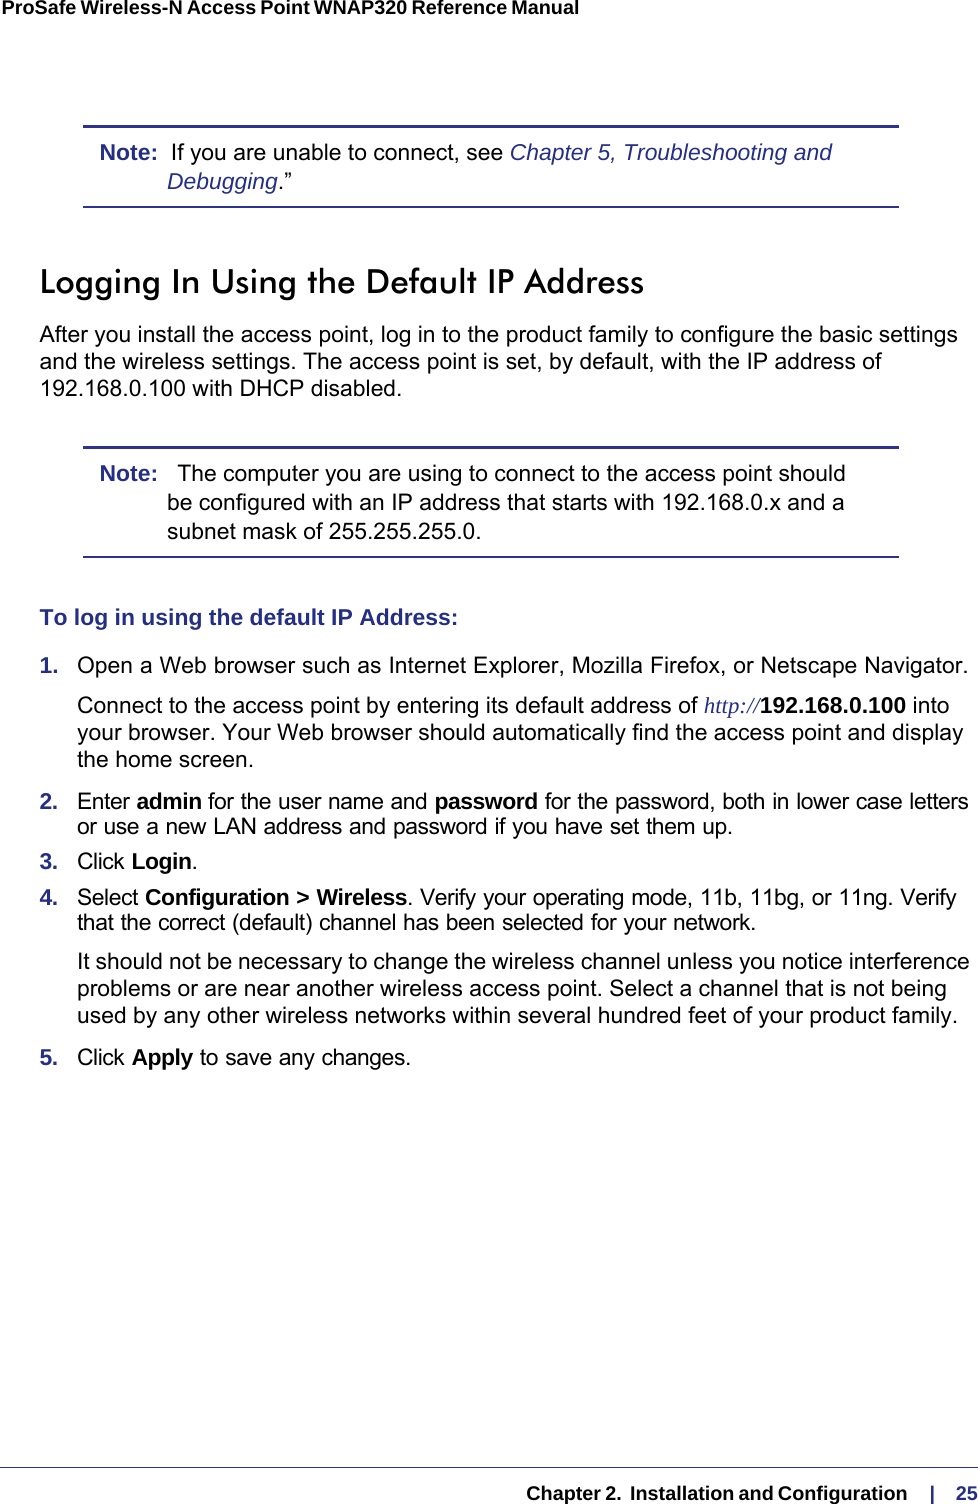   Chapter 2.  Installation and Configuration     |    25ProSafe Wireless-N Access Point WNAP320 Reference Manual Note:  If you are unable to connect, see Chapter 5, Troubleshooting and Debugging.”Logging In Using the Default IP AddressAfter you install the access point, log in to the product family to configure the basic settings and the wireless settings. The access point is set, by default, with the IP address of 192.168.0.100 with DHCP disabled.Note:   The computer you are using to connect to the access point should be configured with an IP address that starts with 192.168.0.x and a subnet mask of 255.255.255.0.To log in using the default IP Address:1.  Open a Web browser such as Internet Explorer, Mozilla Firefox, or Netscape Navigator. Connect to the access point by entering its default address of http://192.168.0.100 into your browser. Your Web browser should automatically find the access point and display the home screen.2.  Enter admin for the user name and password for the password, both in lower case letters or use a new LAN address and password if you have set them up.3.  Click Login.4.  Select Configuration &gt; Wireless. Verify your operating mode, 11b, 11bg, or 11ng. Verify that the correct (default) channel has been selected for your network. It should not be necessary to change the wireless channel unless you notice interference problems or are near another wireless access point. Select a channel that is not being used by any other wireless networks within several hundred feet of your product family. 5.  Click Apply to save any changes. 